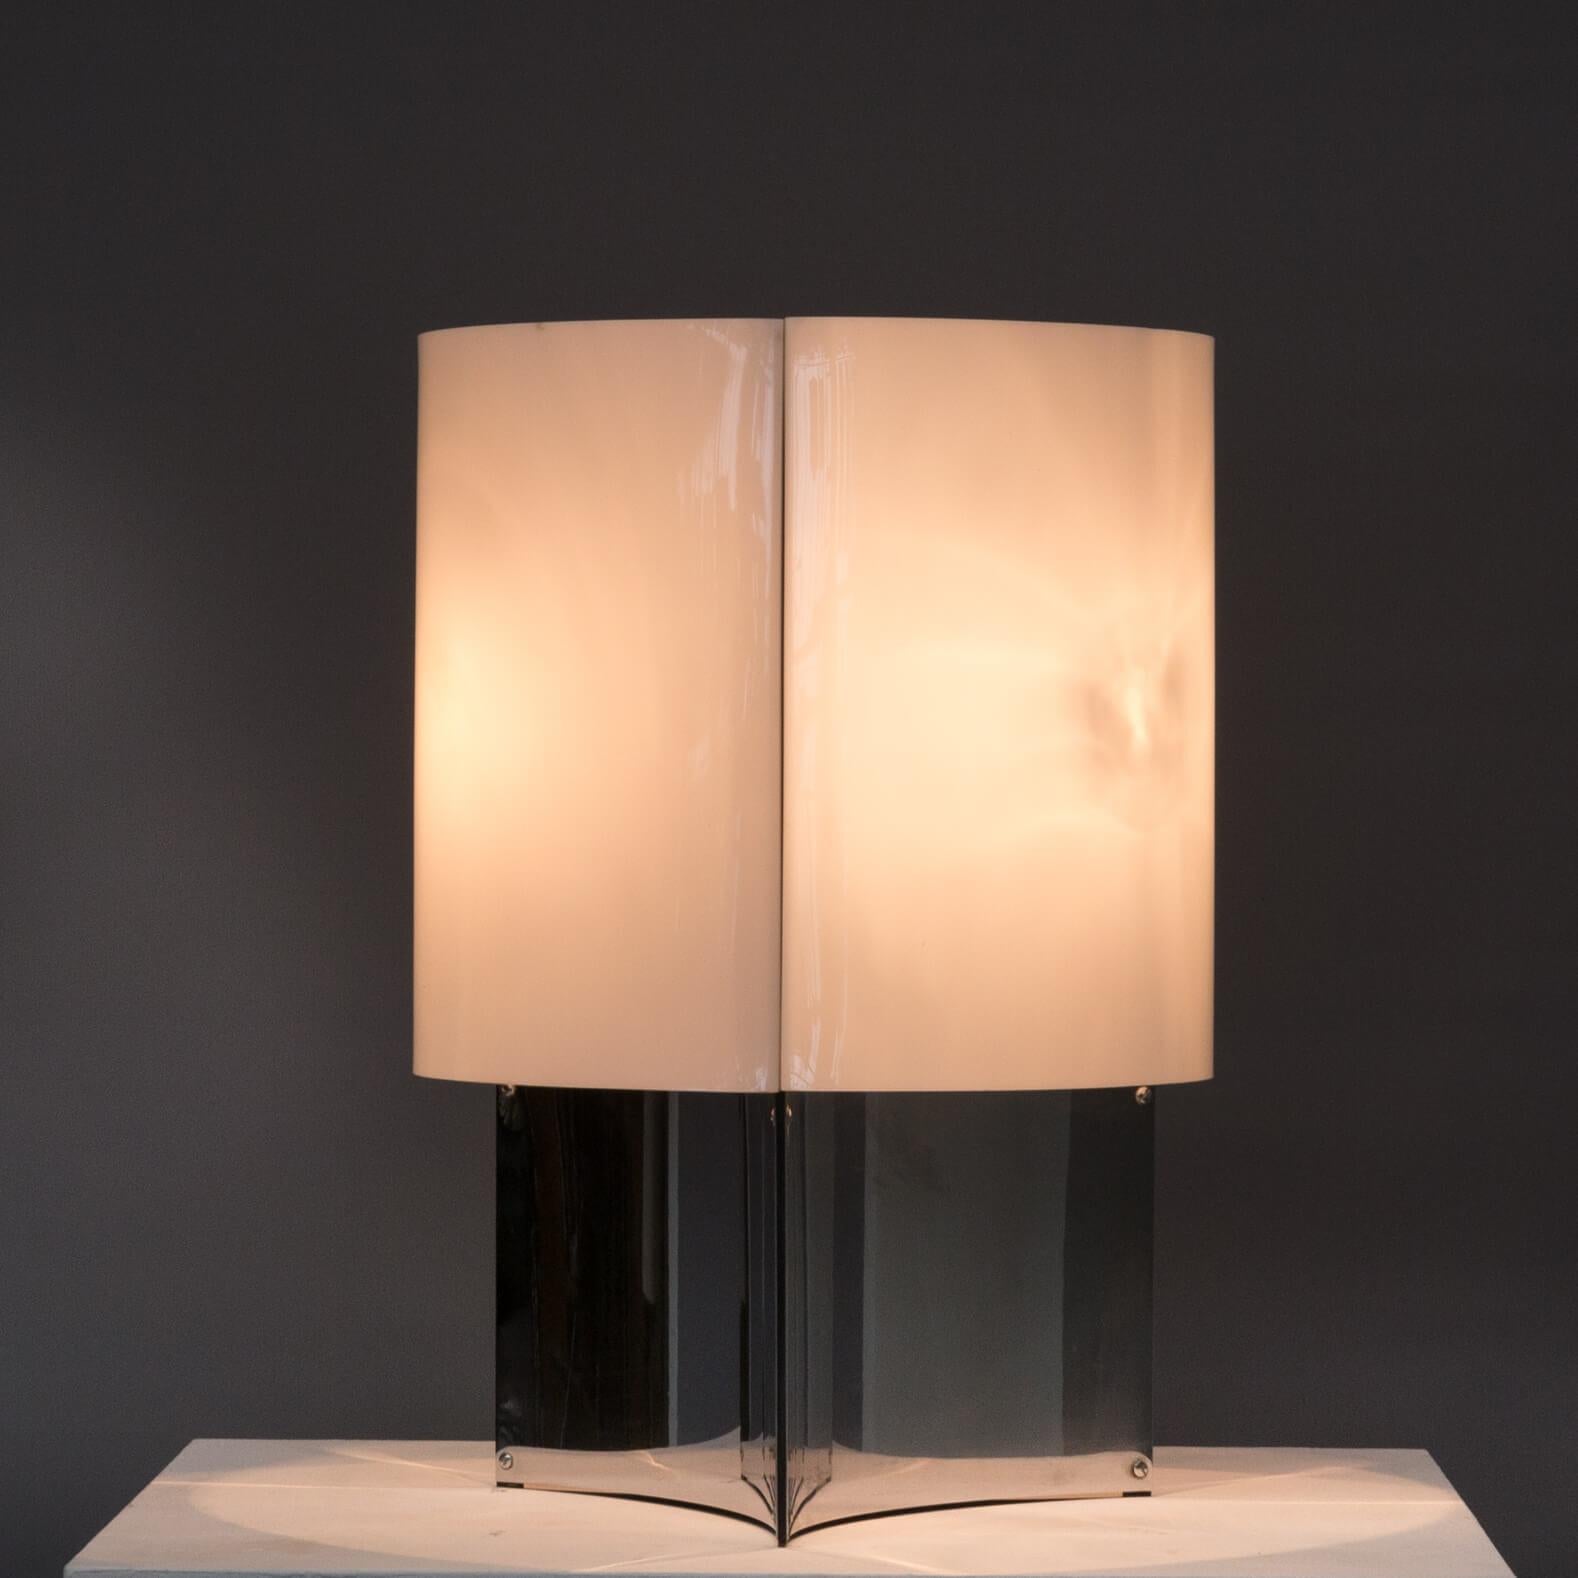 Large table or floor lamp model 526/Grande. This monumental lamp has a chrome-plated metal base and a white plexi shade. The lamp uses 3 light bulbs for beautiful spherical light. This object is one of the very few lights from Arteluce that was not